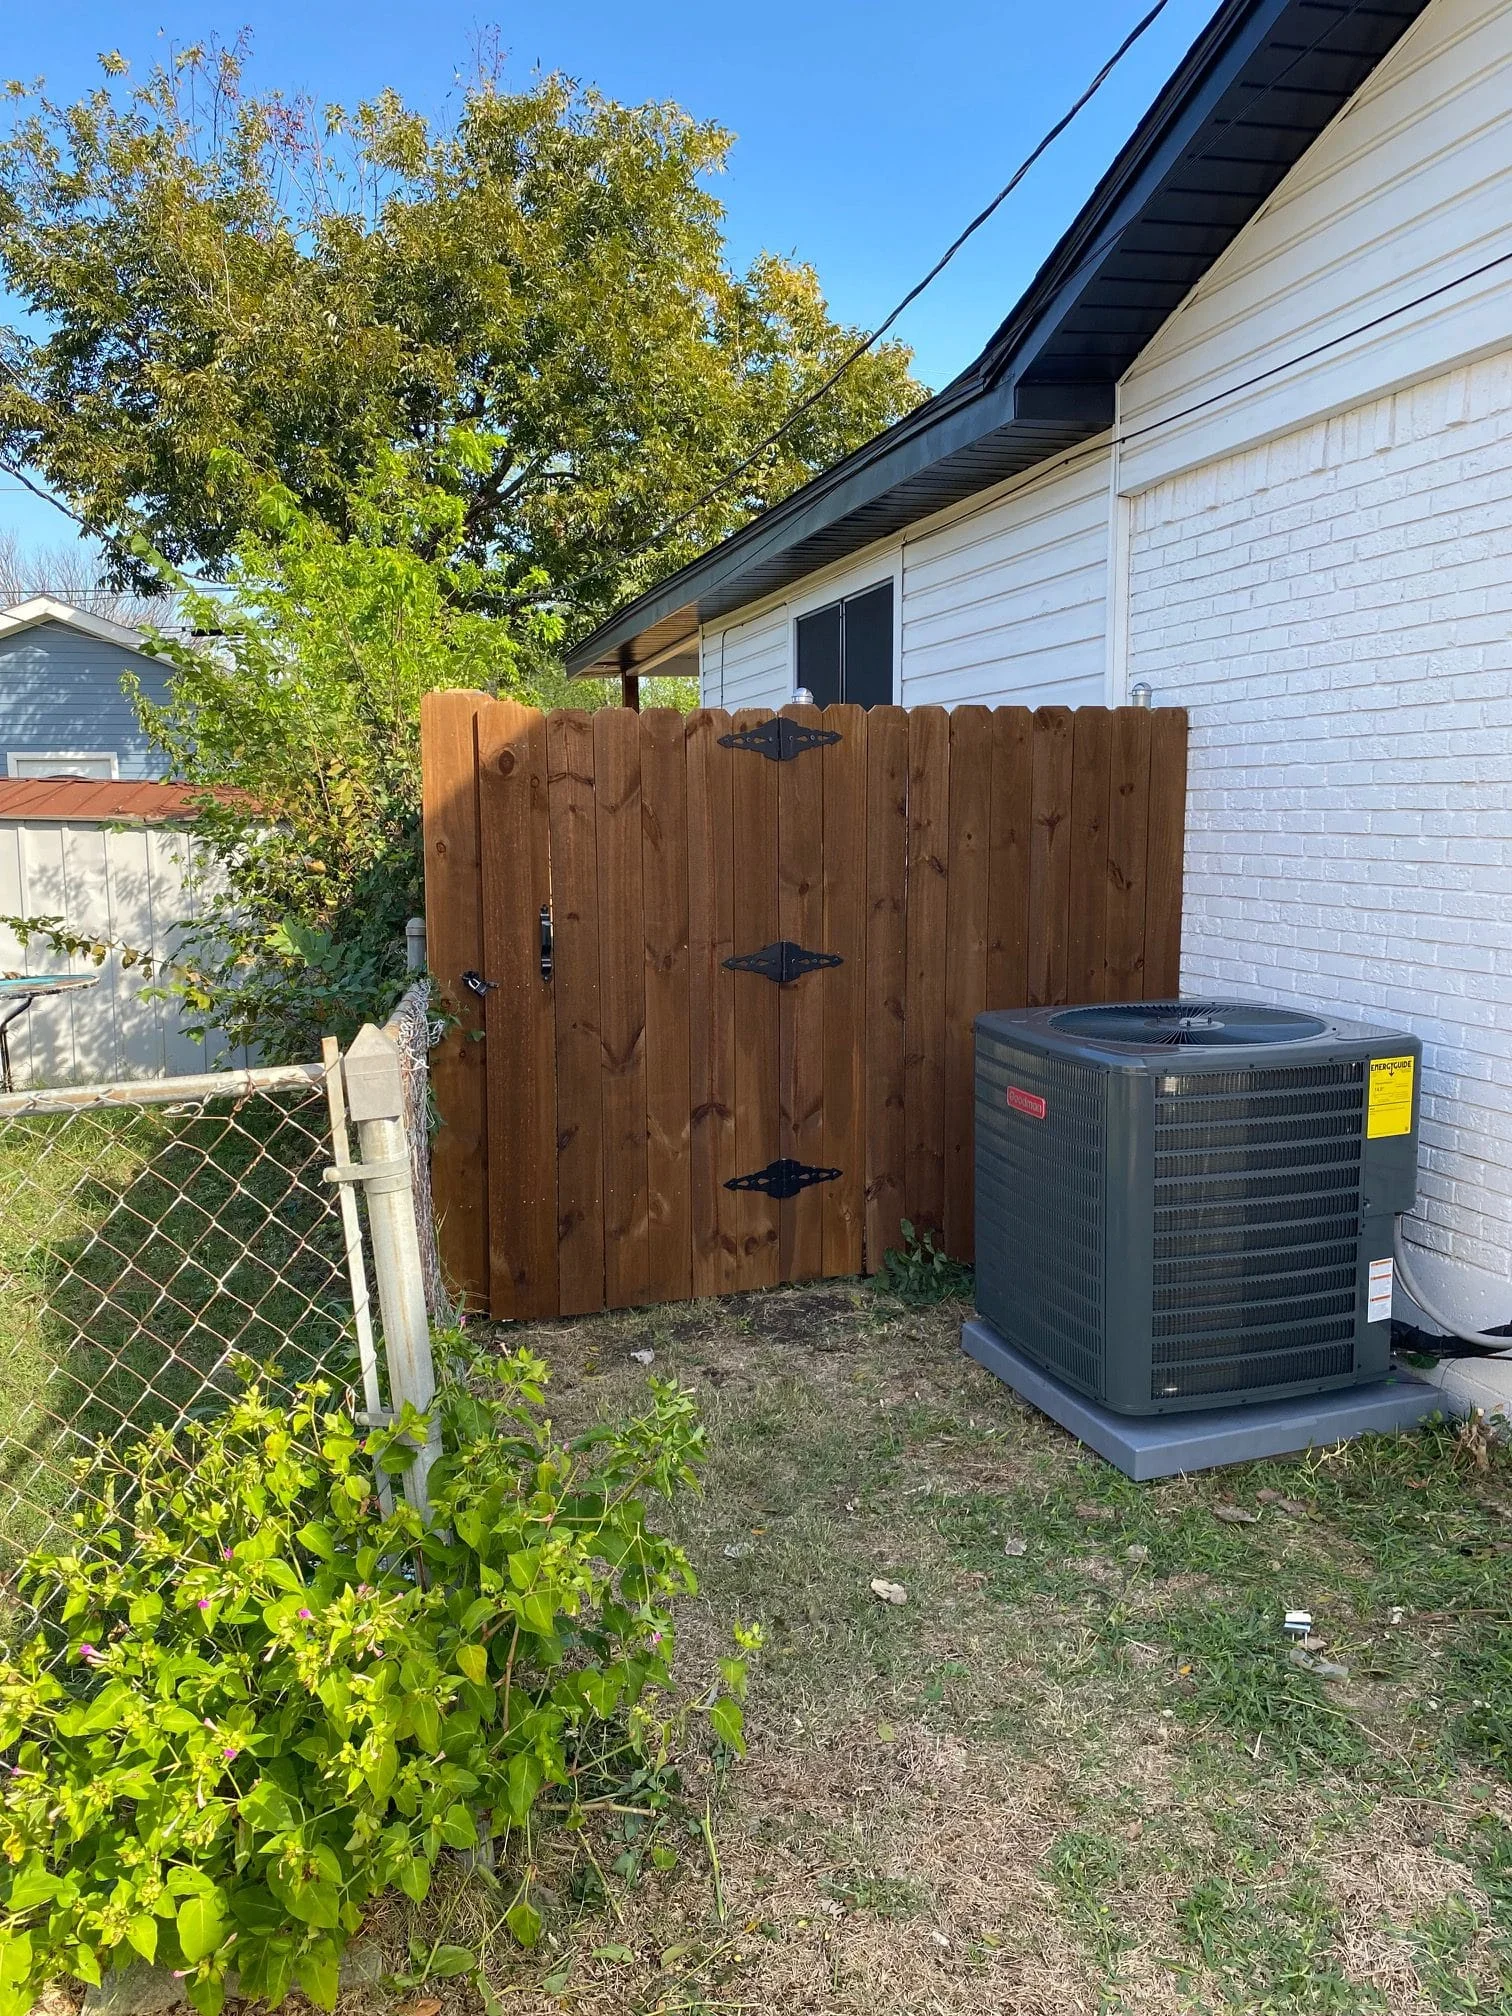 Full view of the installation of a Goodman condenser with new condenser pad and anti-tampering service port locking caps in Desoto, Texas